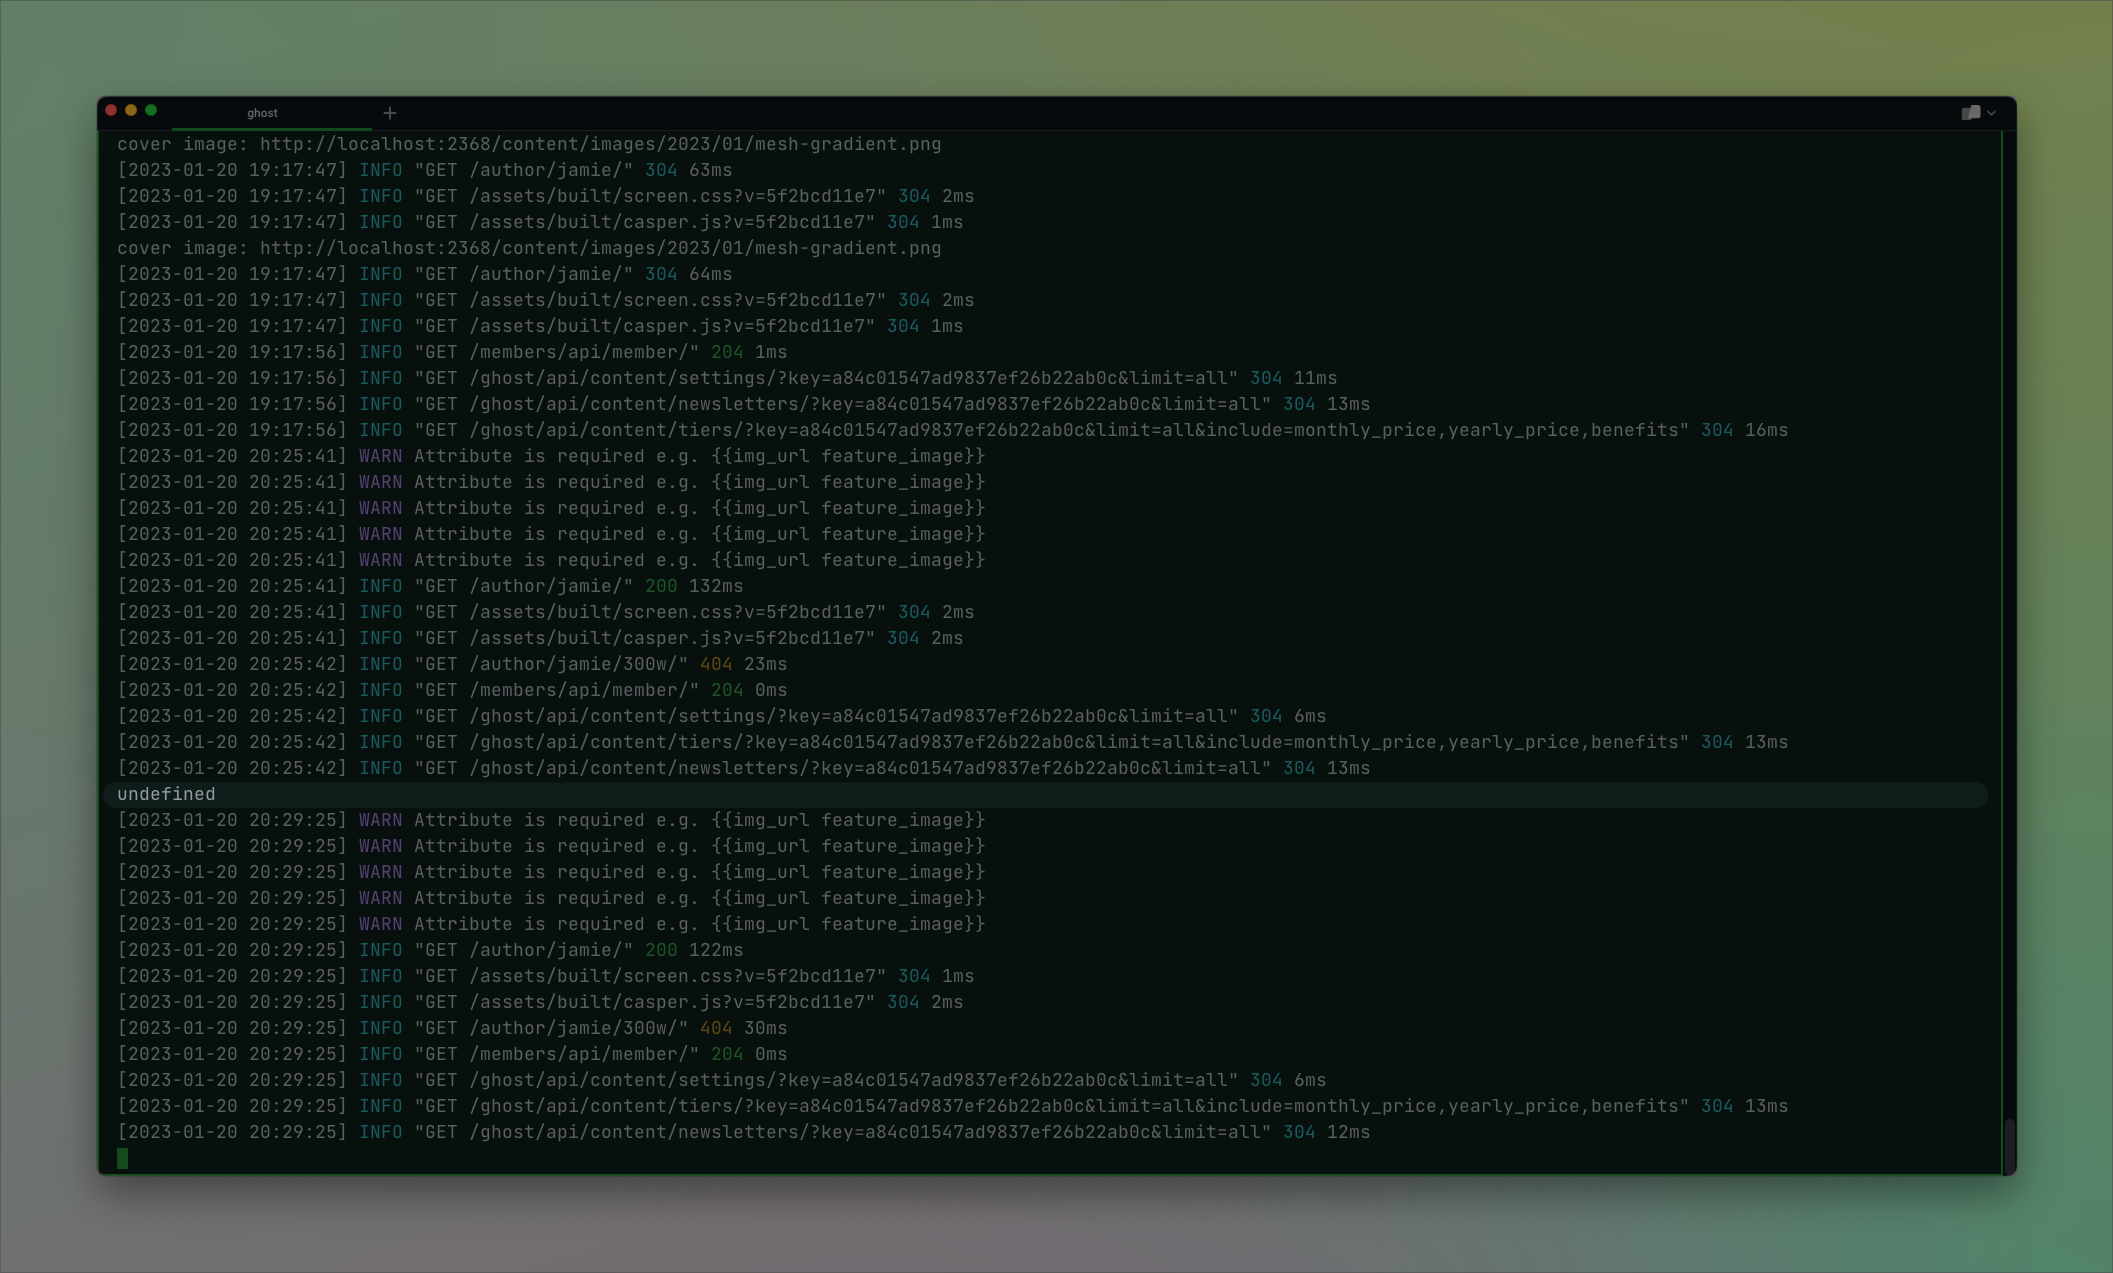 The terminal shows undefined